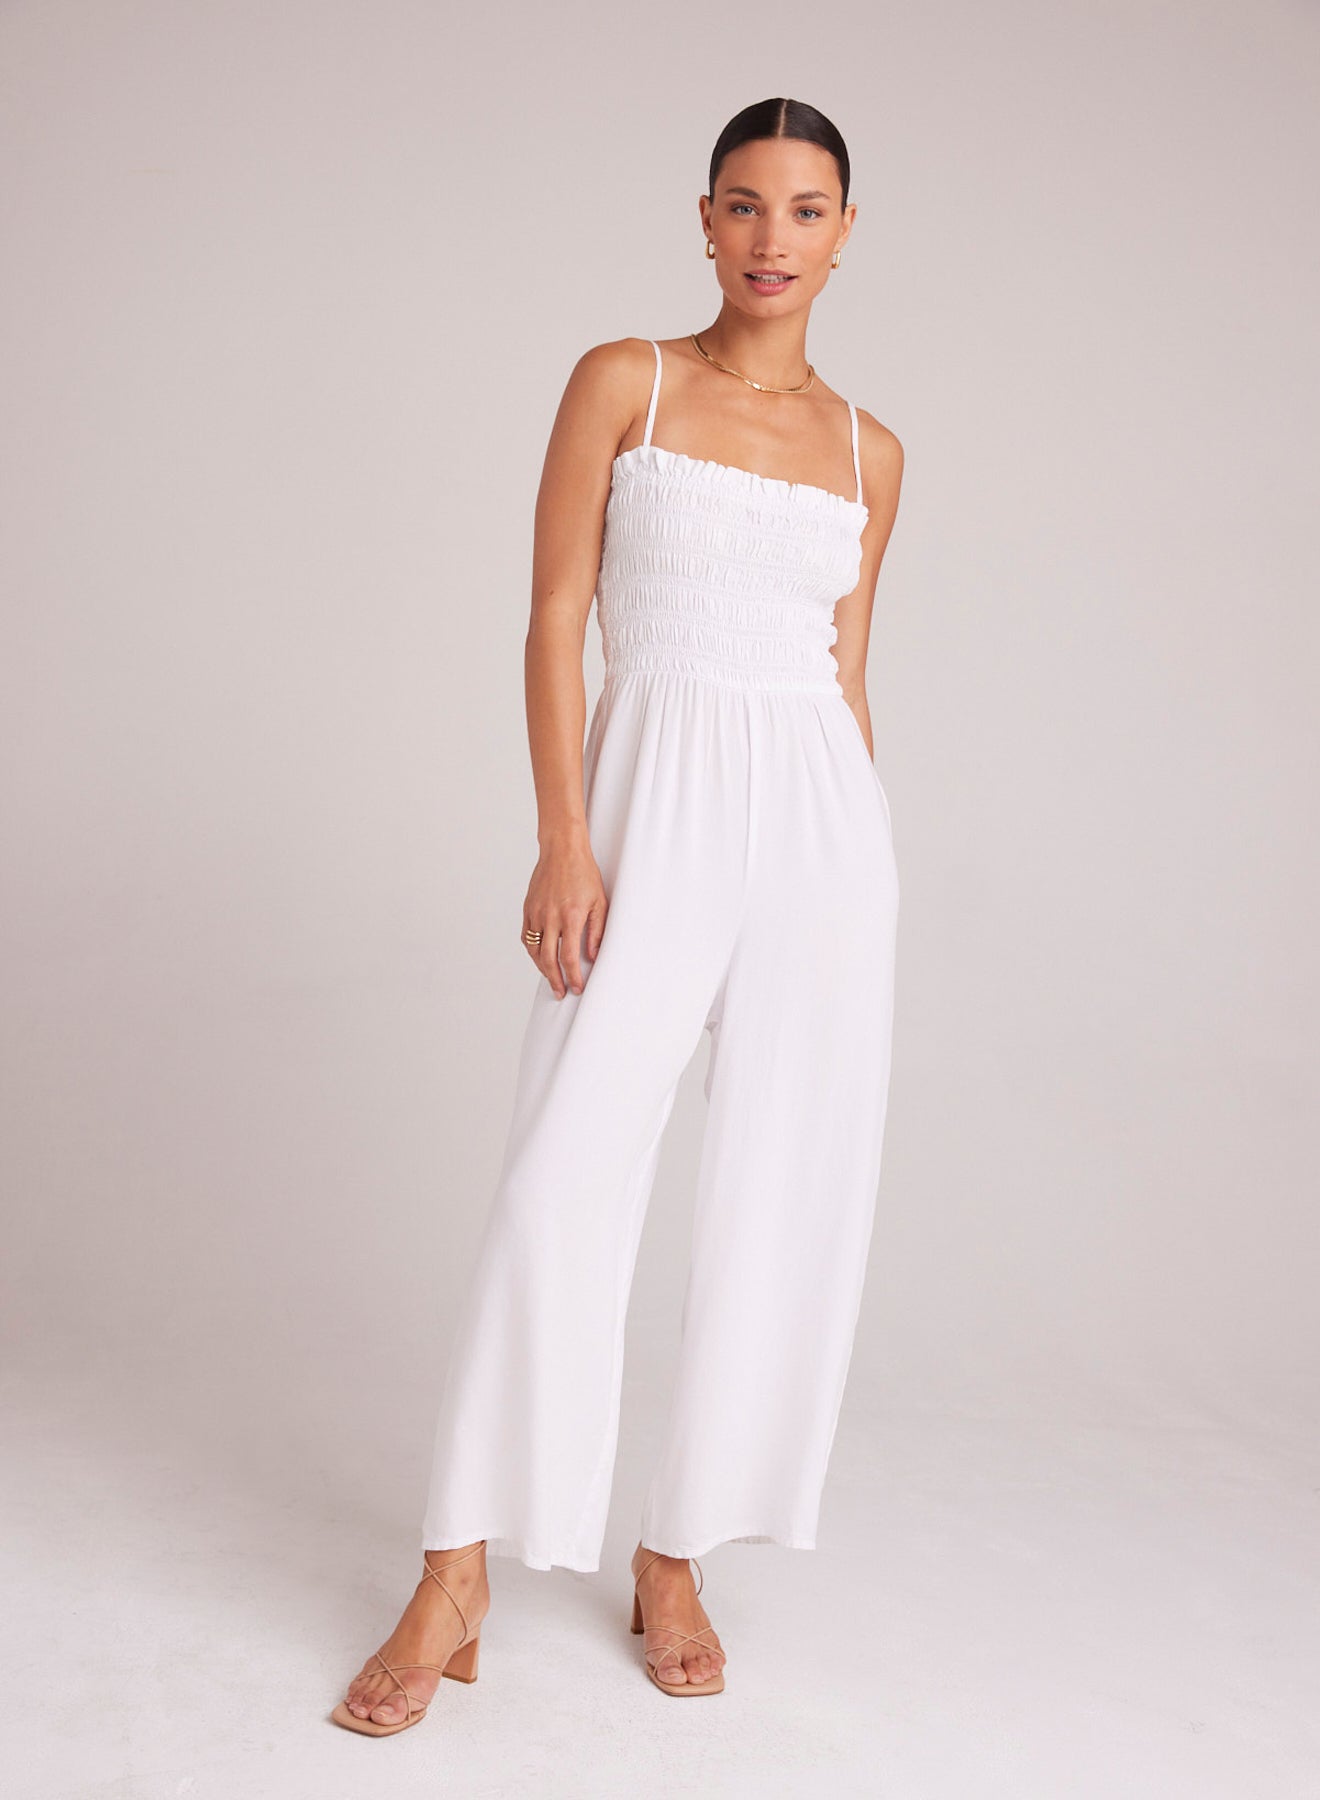 Bella DahlWide Leg Smocked Ruffle Jumpsuit - WhiteJumpsuits & Rompers